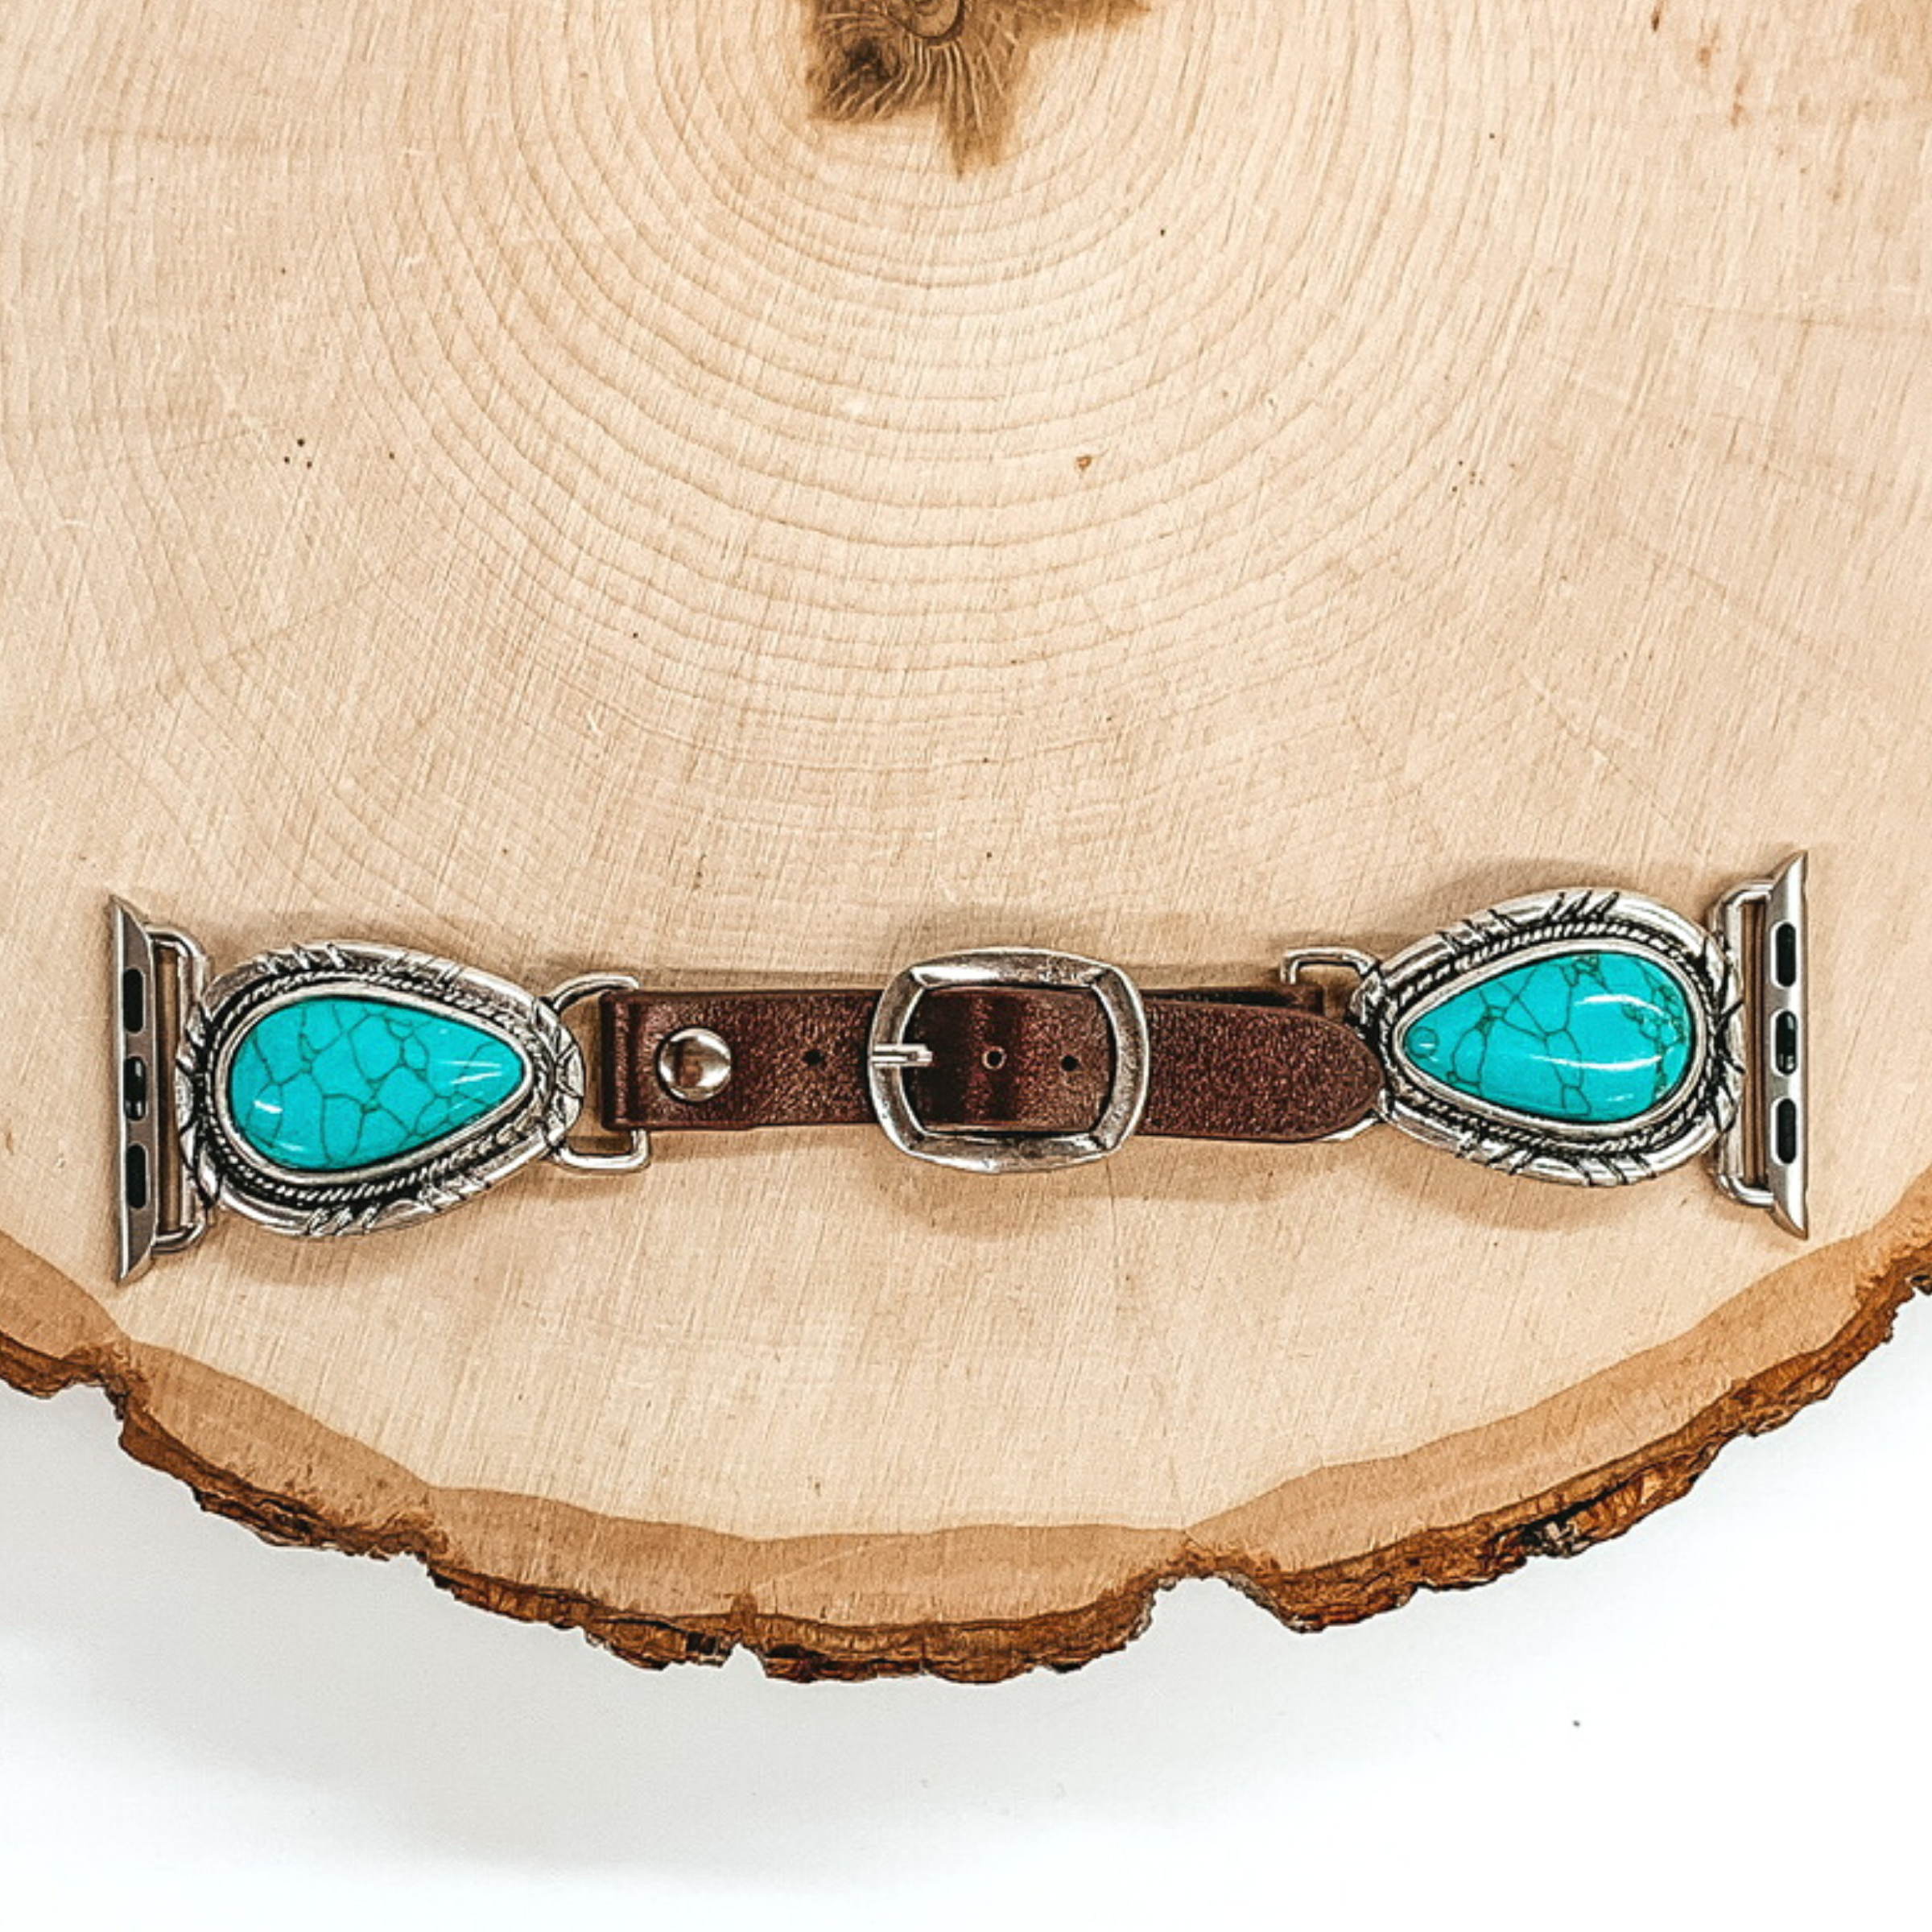 Dark Brown watch band with silver, teardrop pendant ends with Apple watch band acessories. The teardrop pendant has a teardrop shaped turquoise stone. This watch band is pictured on a piece of wood on a white background.